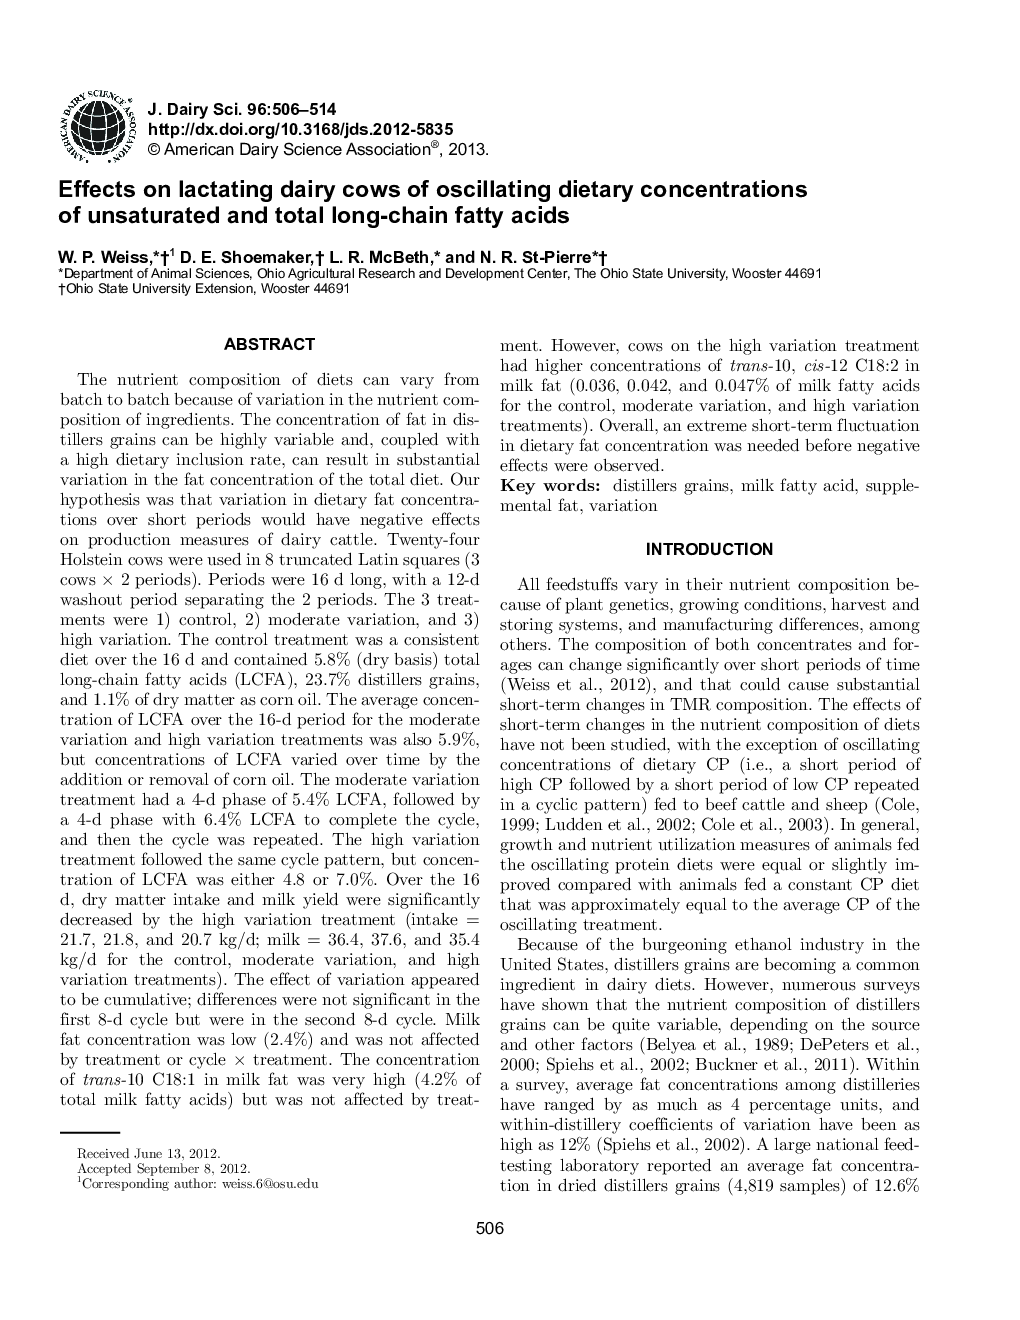 Effects on lactating dairy cows of oscillating dietary concentrations of unsaturated and total long-chain fatty acids